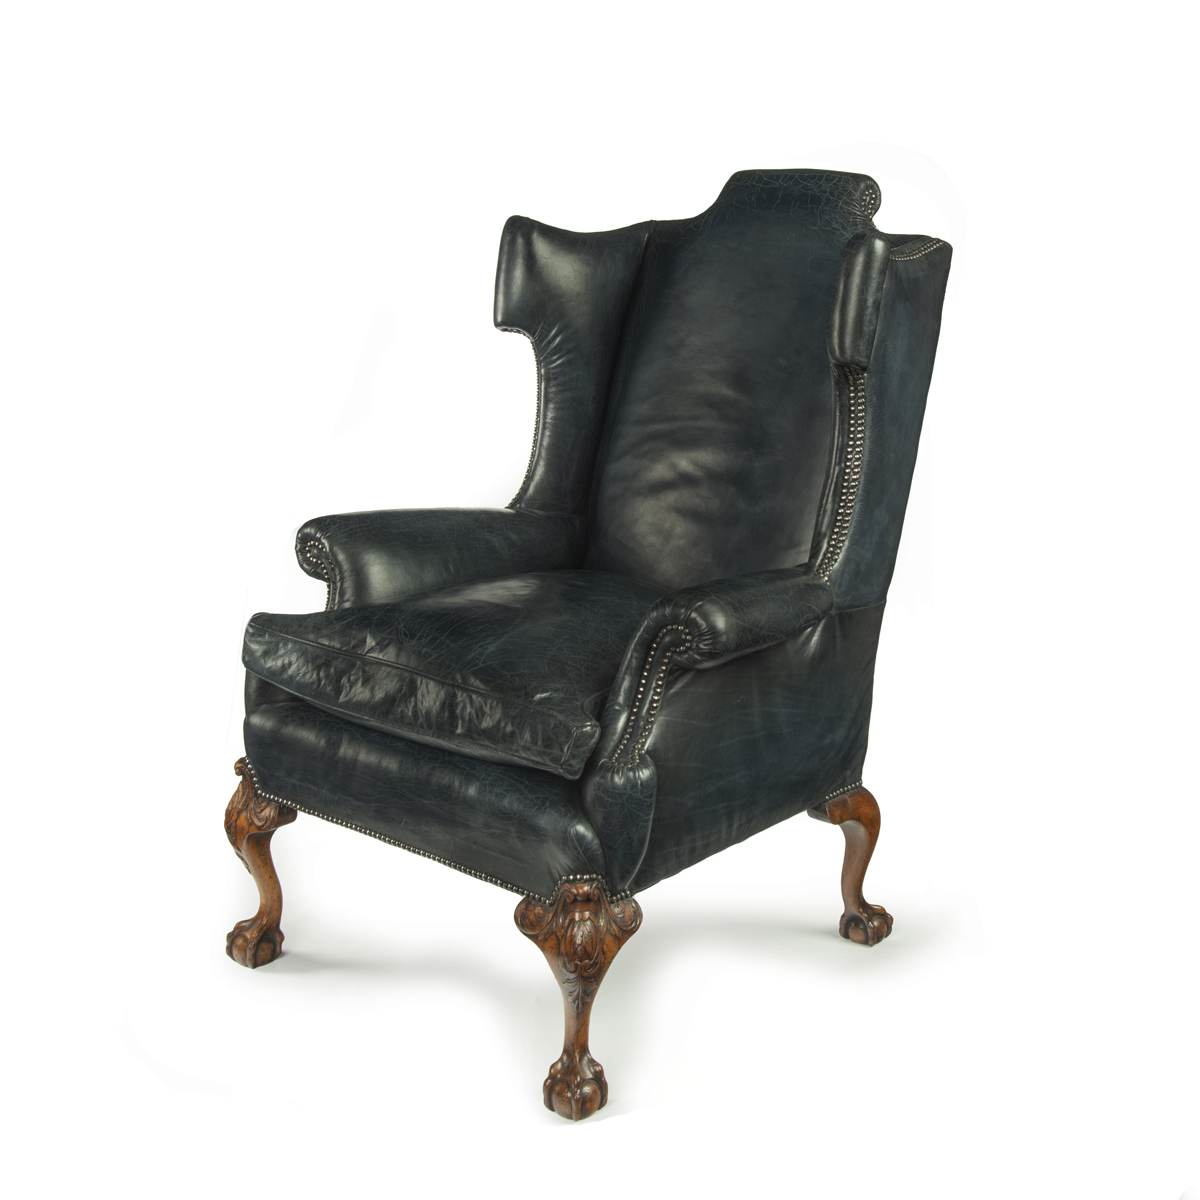 A generous late Victorian walnut wing arm chair, in the Georgian style